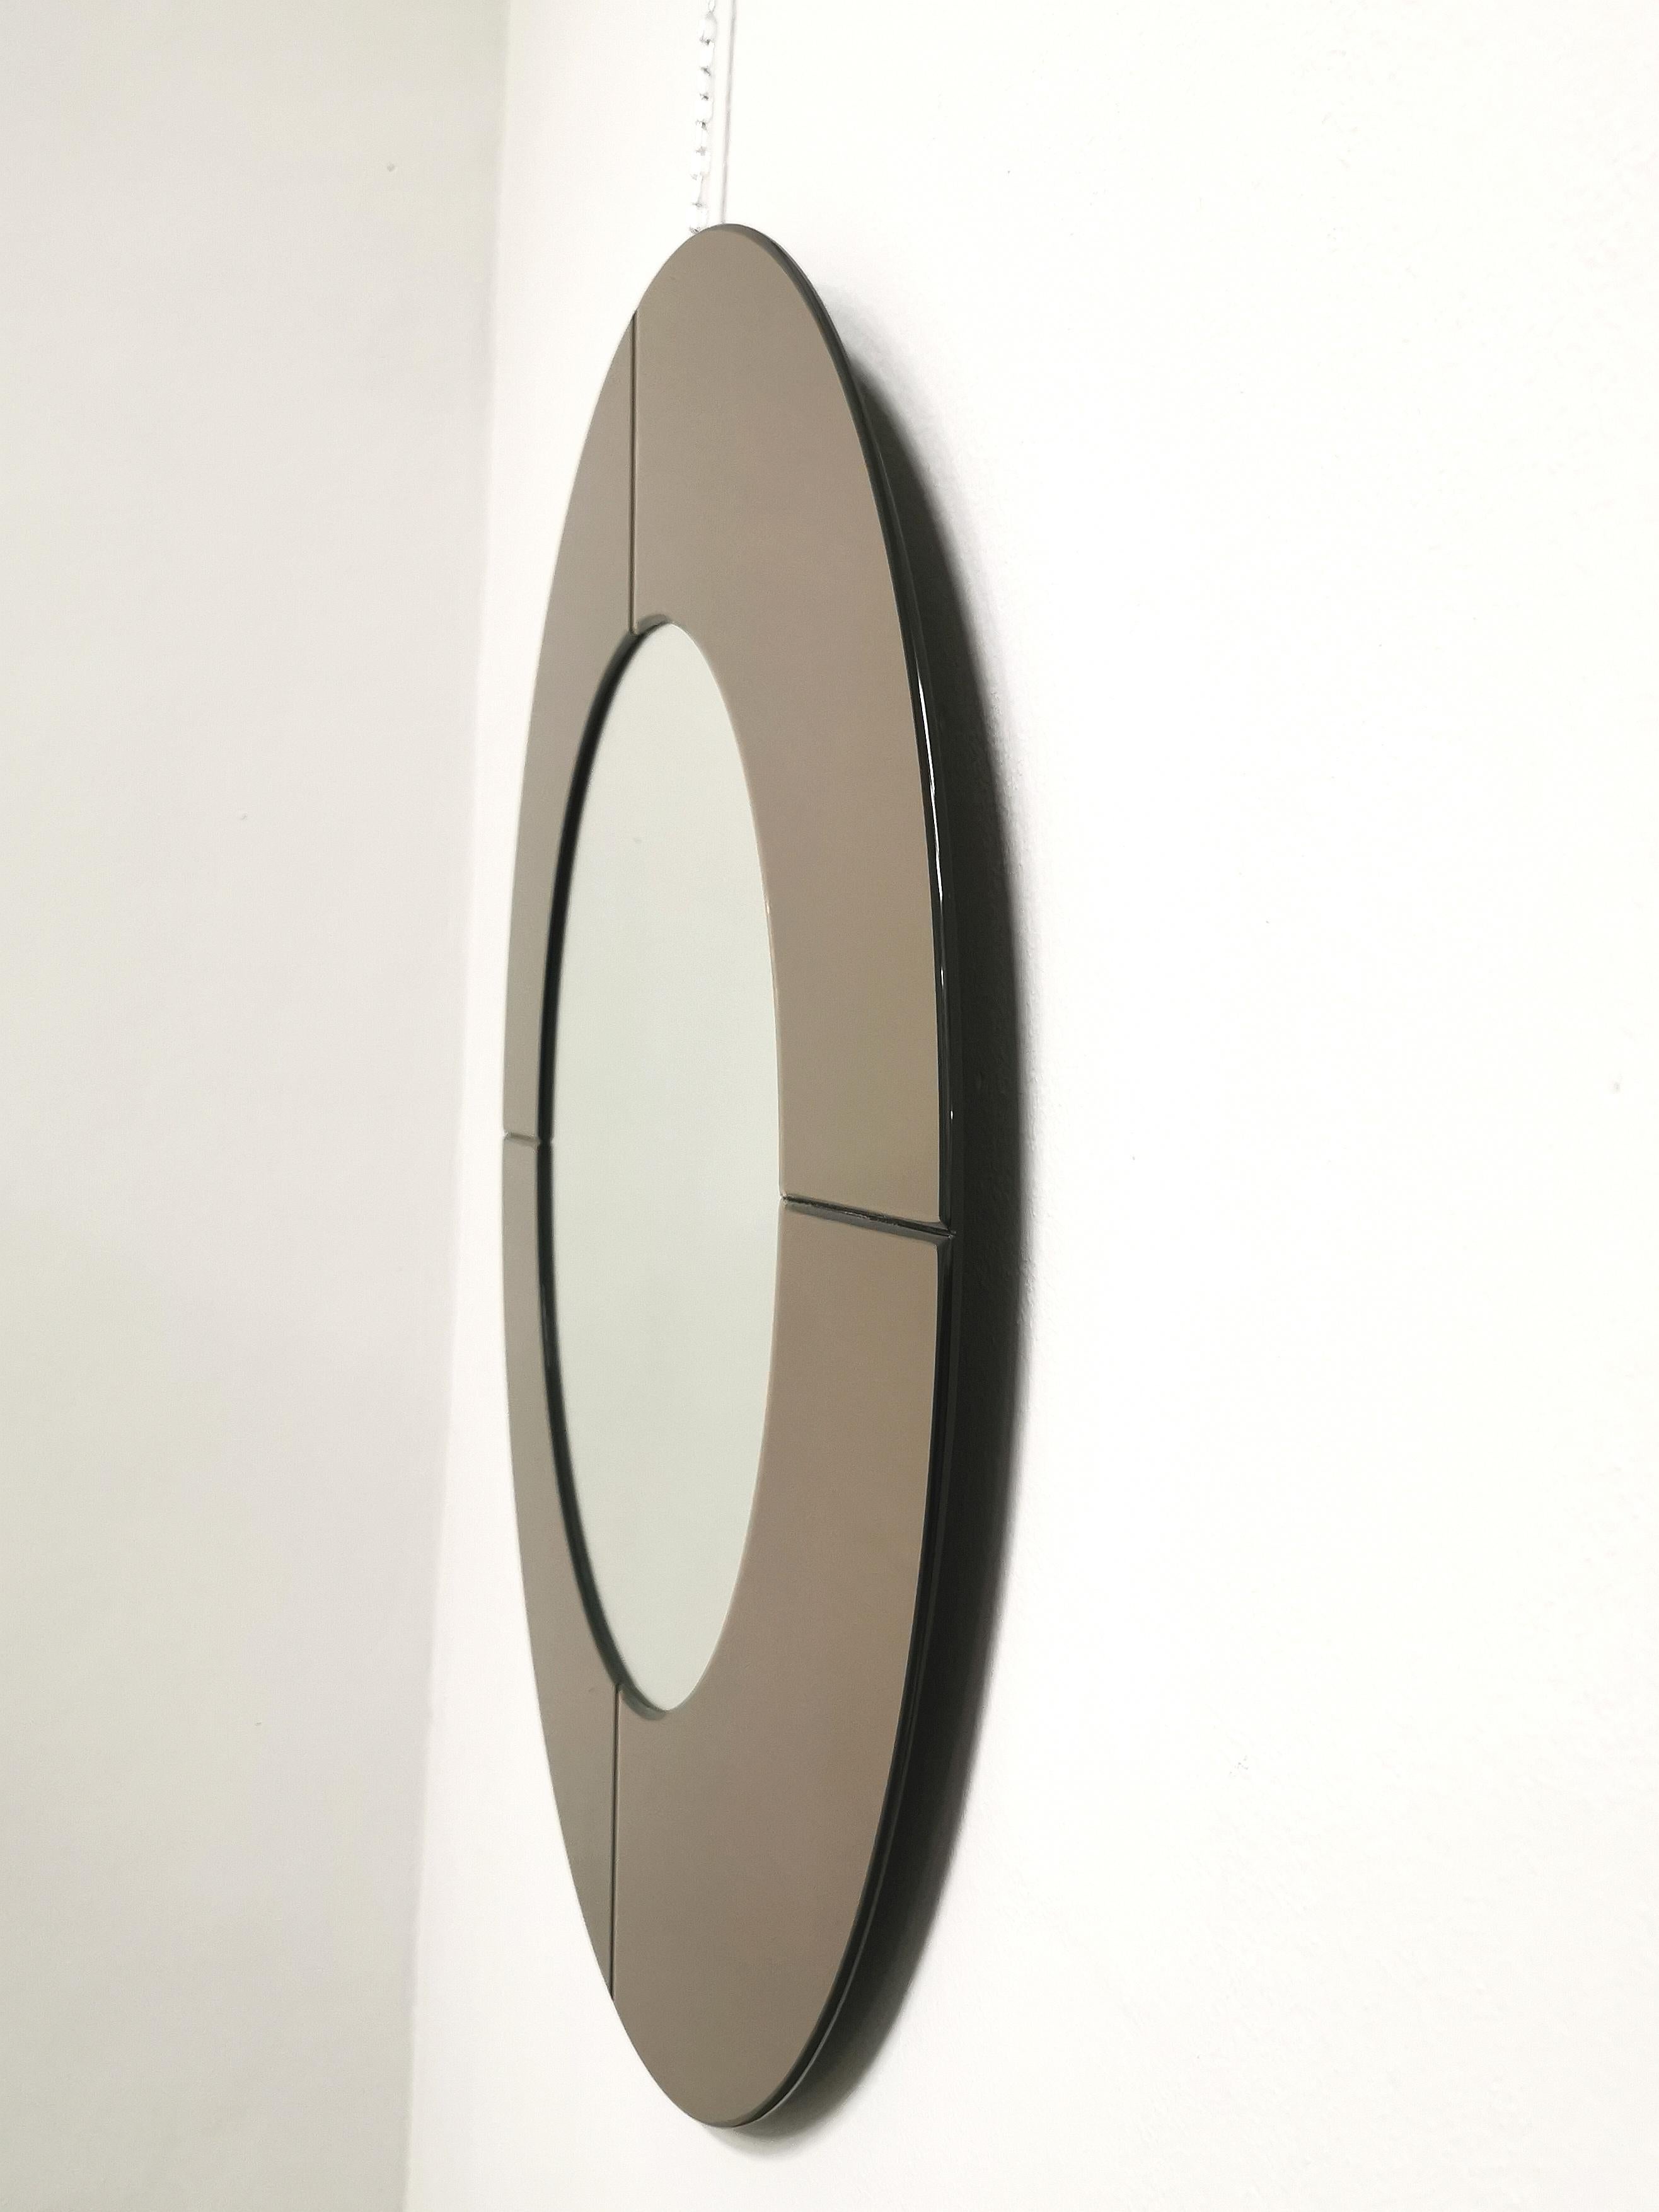 Midcentury Wall Mirror Mirrored Glass Smoked Round Large Italian Design 1970s For Sale 3